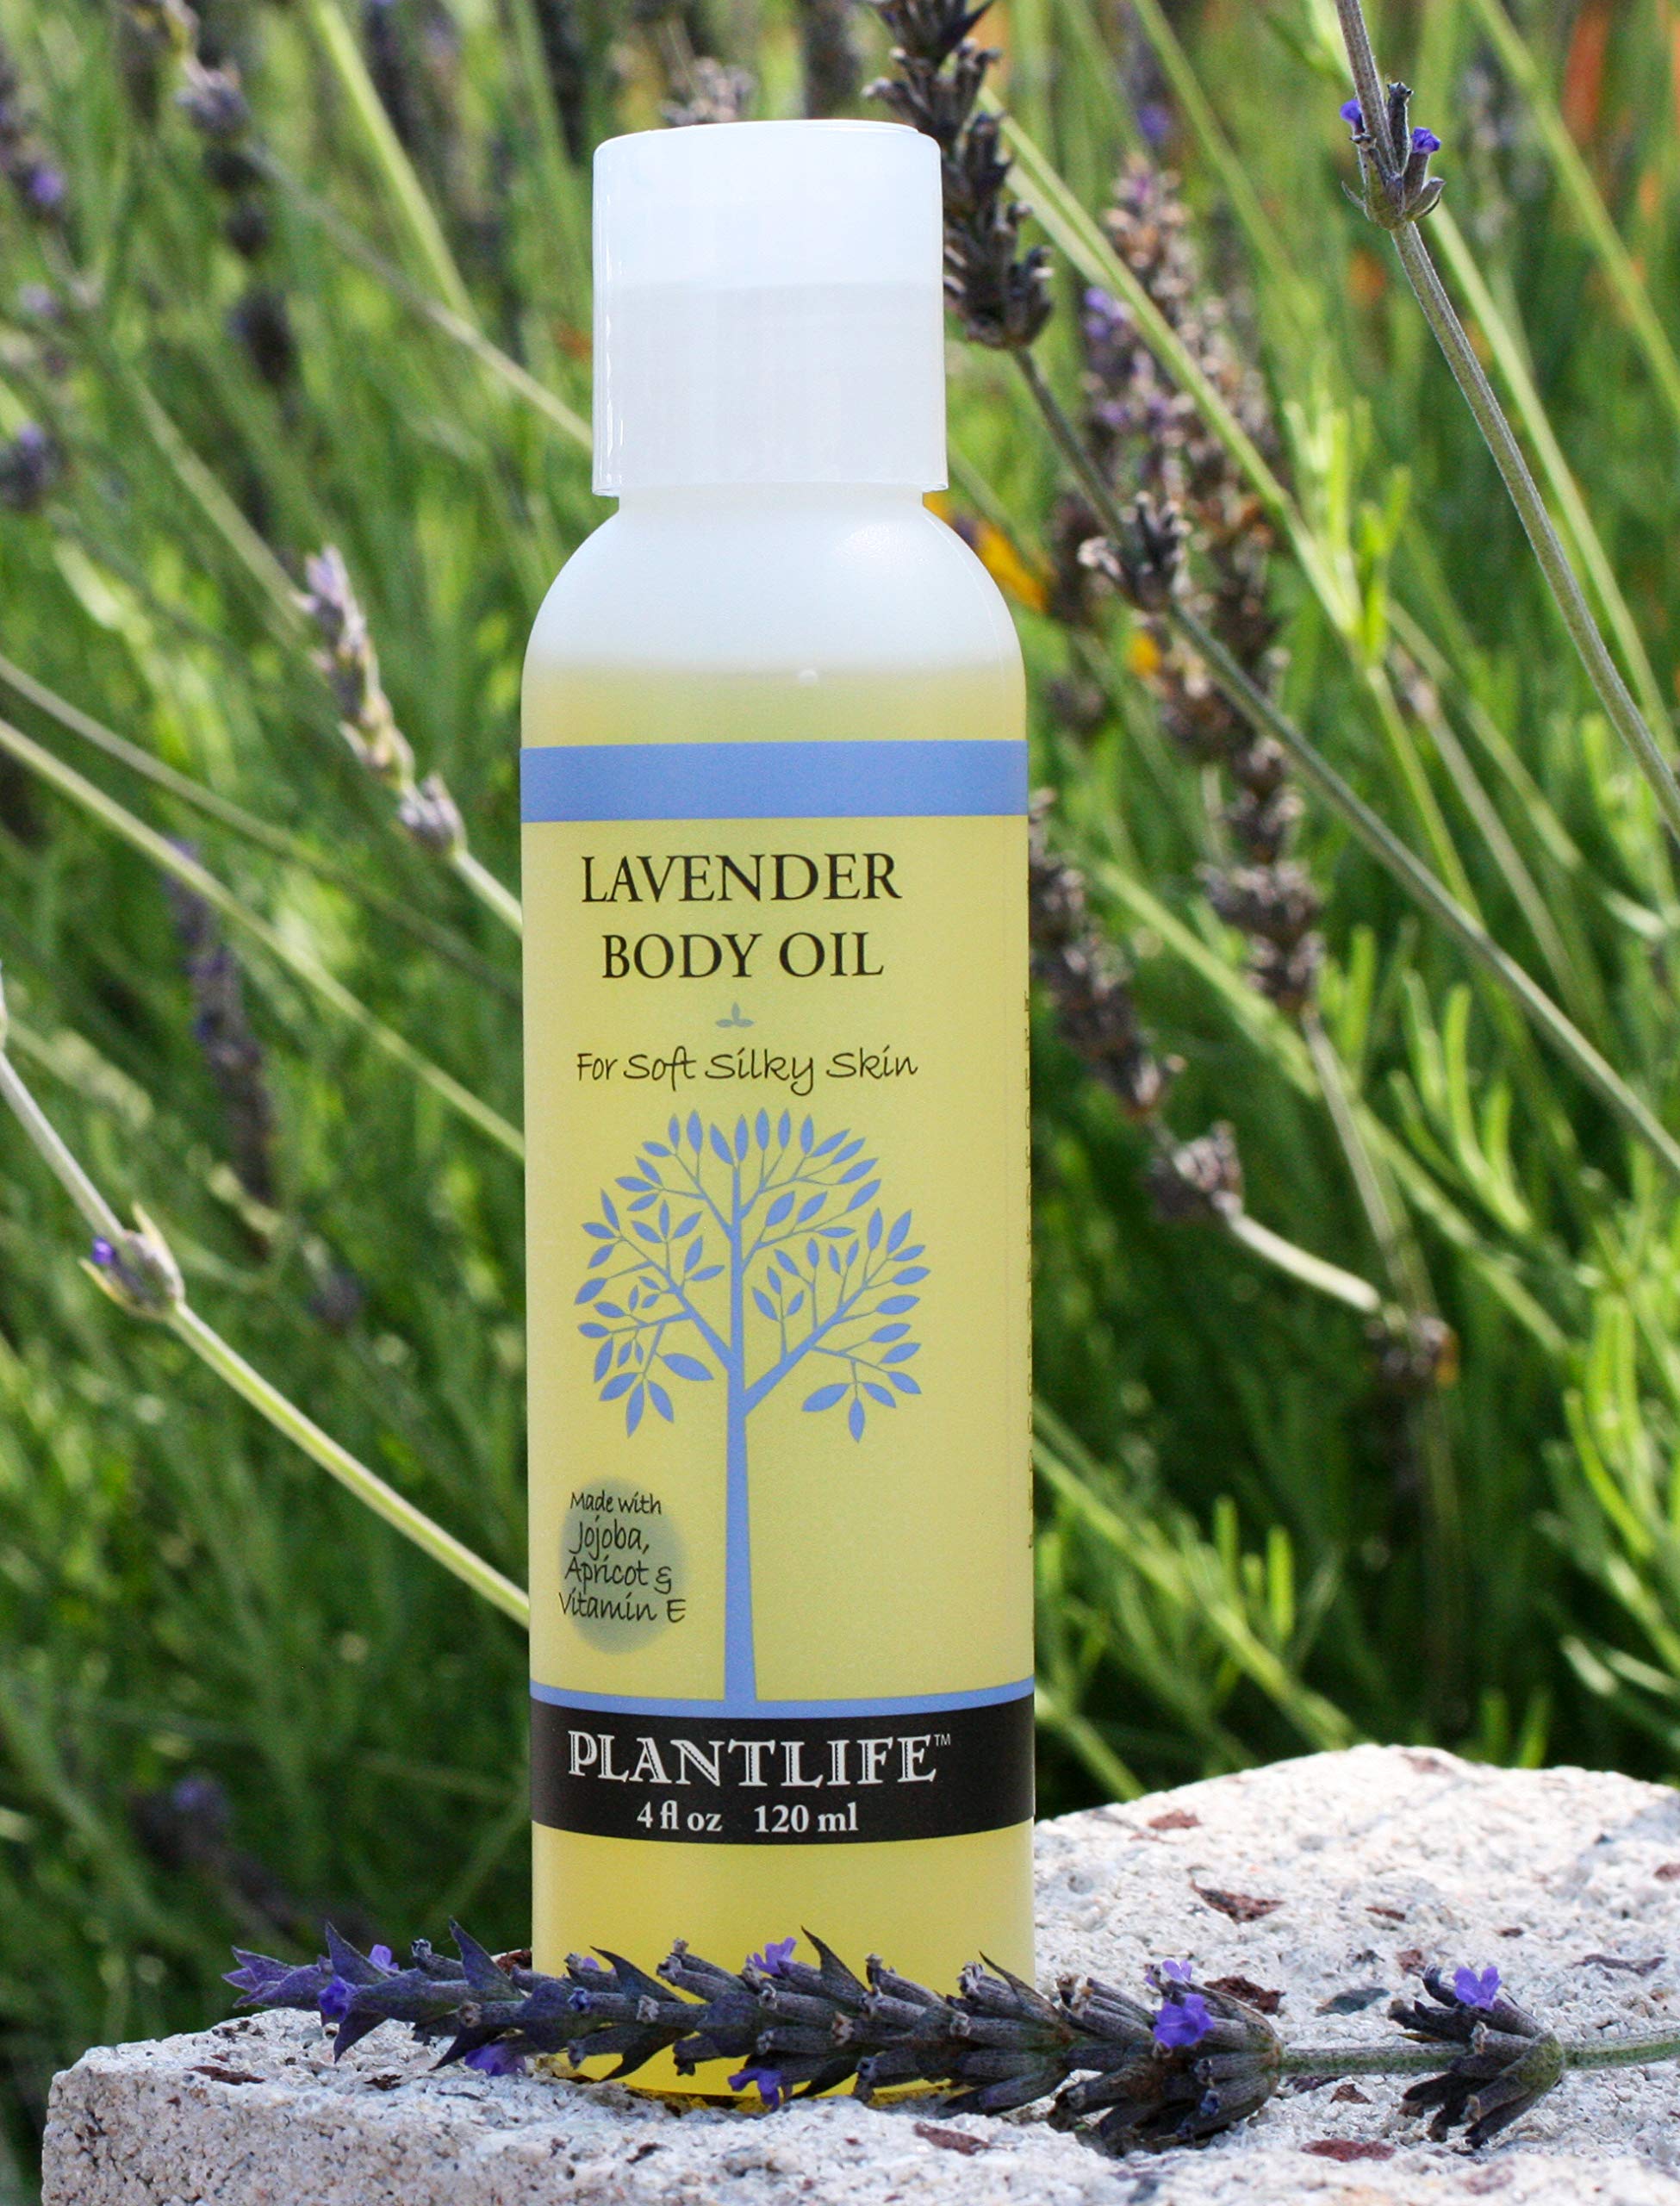 Plantlife Lavender Body Oil - Formulated for Soft and Silky Skin Using Rich Plant Oils That Absorb and Leave a Light Aroma on the Skin - Made in California 4 oz